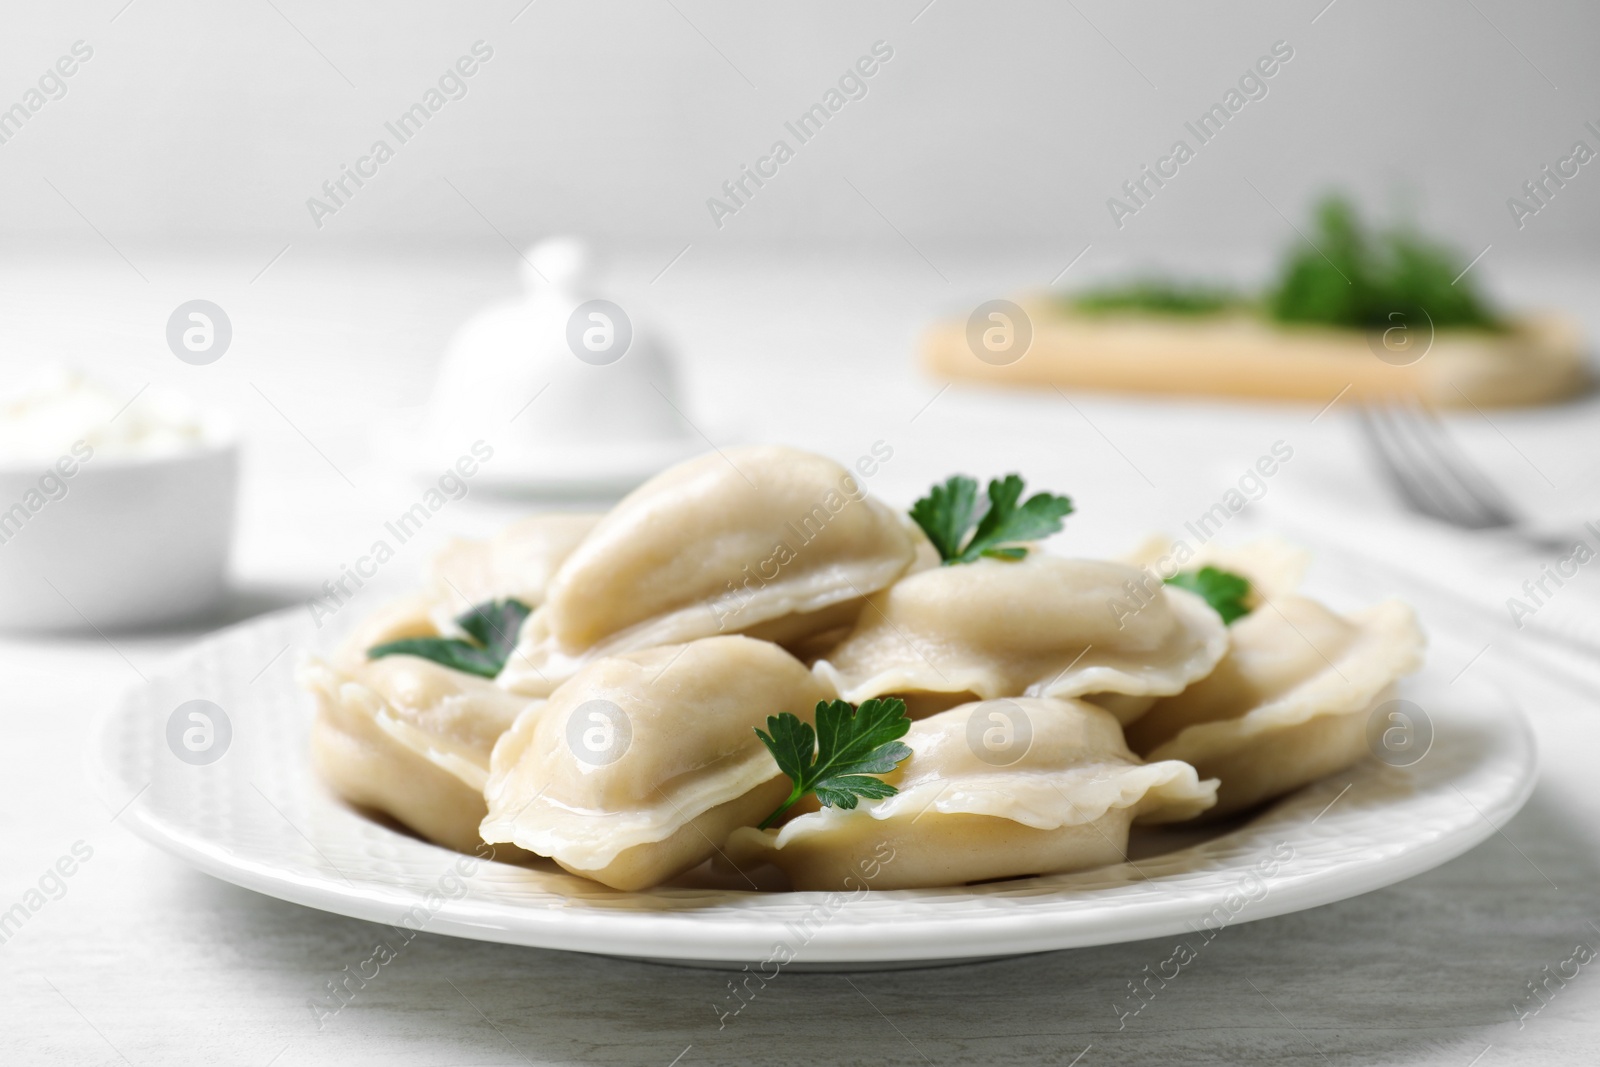 Photo of Plate of tasty dumplings served with parsley on table